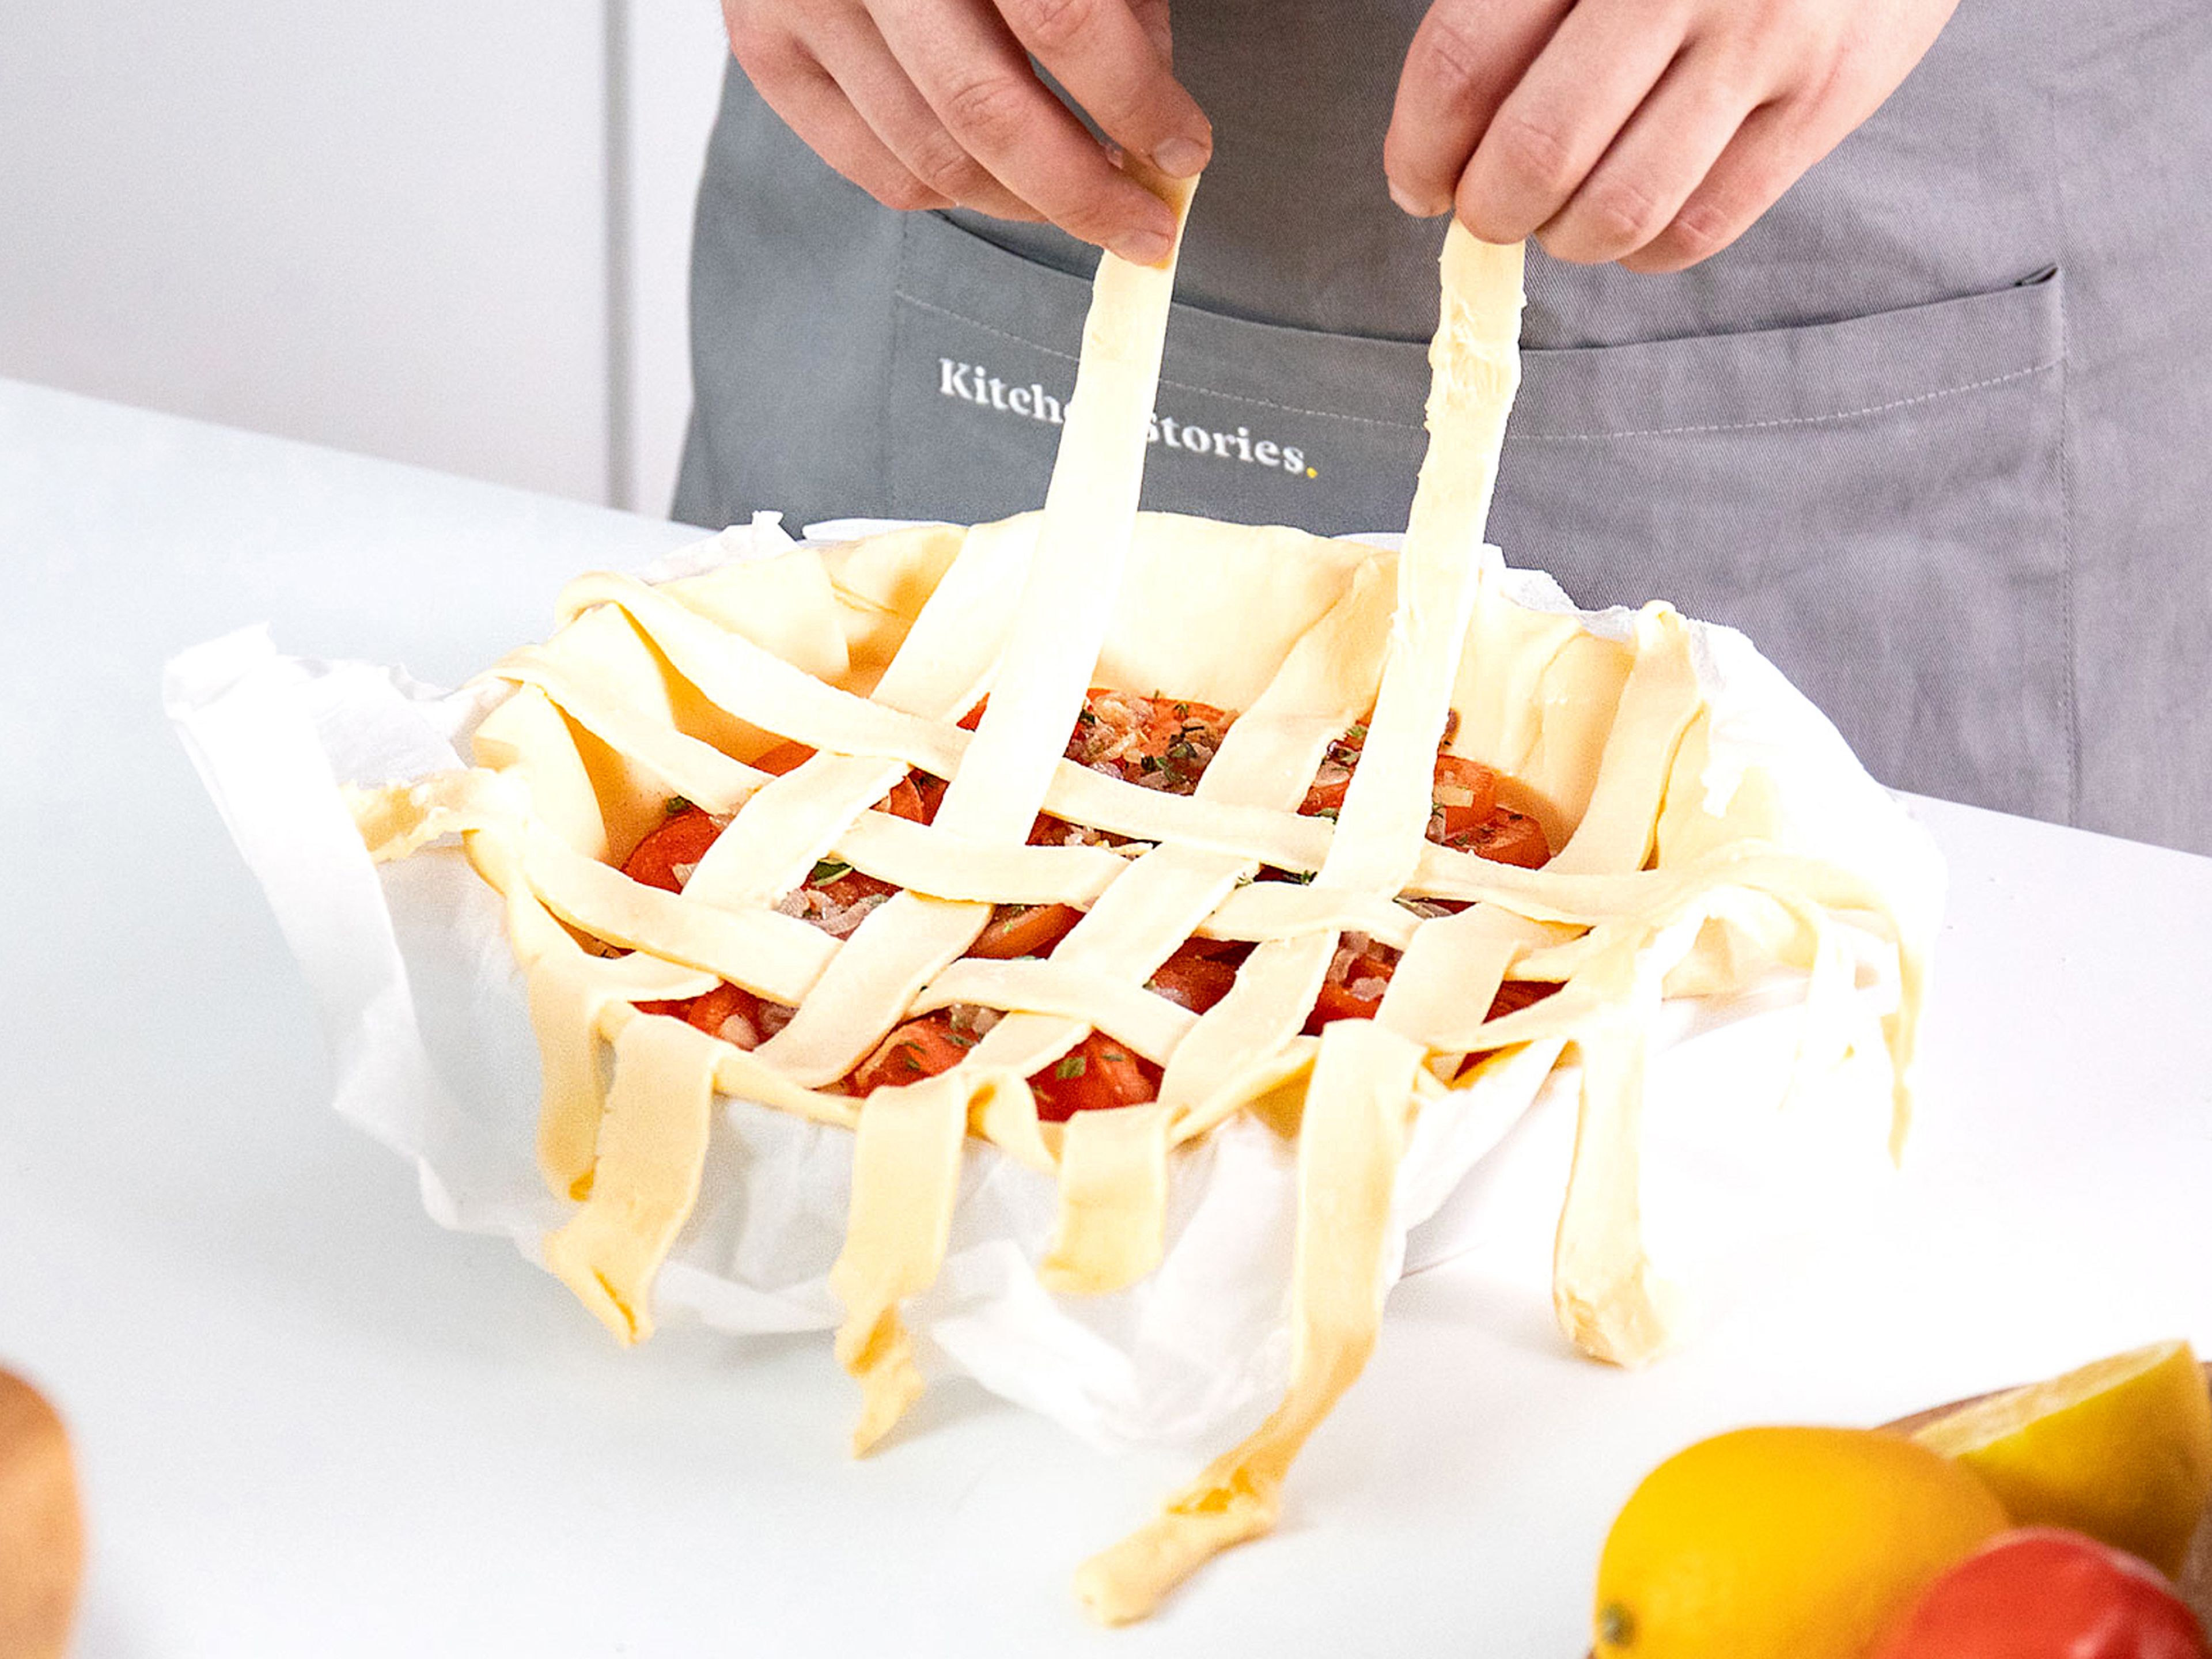 Cut the second sheet puff pastry into approx. 1 ¼ cm/½ in. wide strips. Layer the strips to form a lattice pattern over the pie. Now trim both pastry sheets, leaving approx. 1 ¼ cm/½ in. of dough hanging over the sides. Press to seal the dough together and wrap it up around the edges.